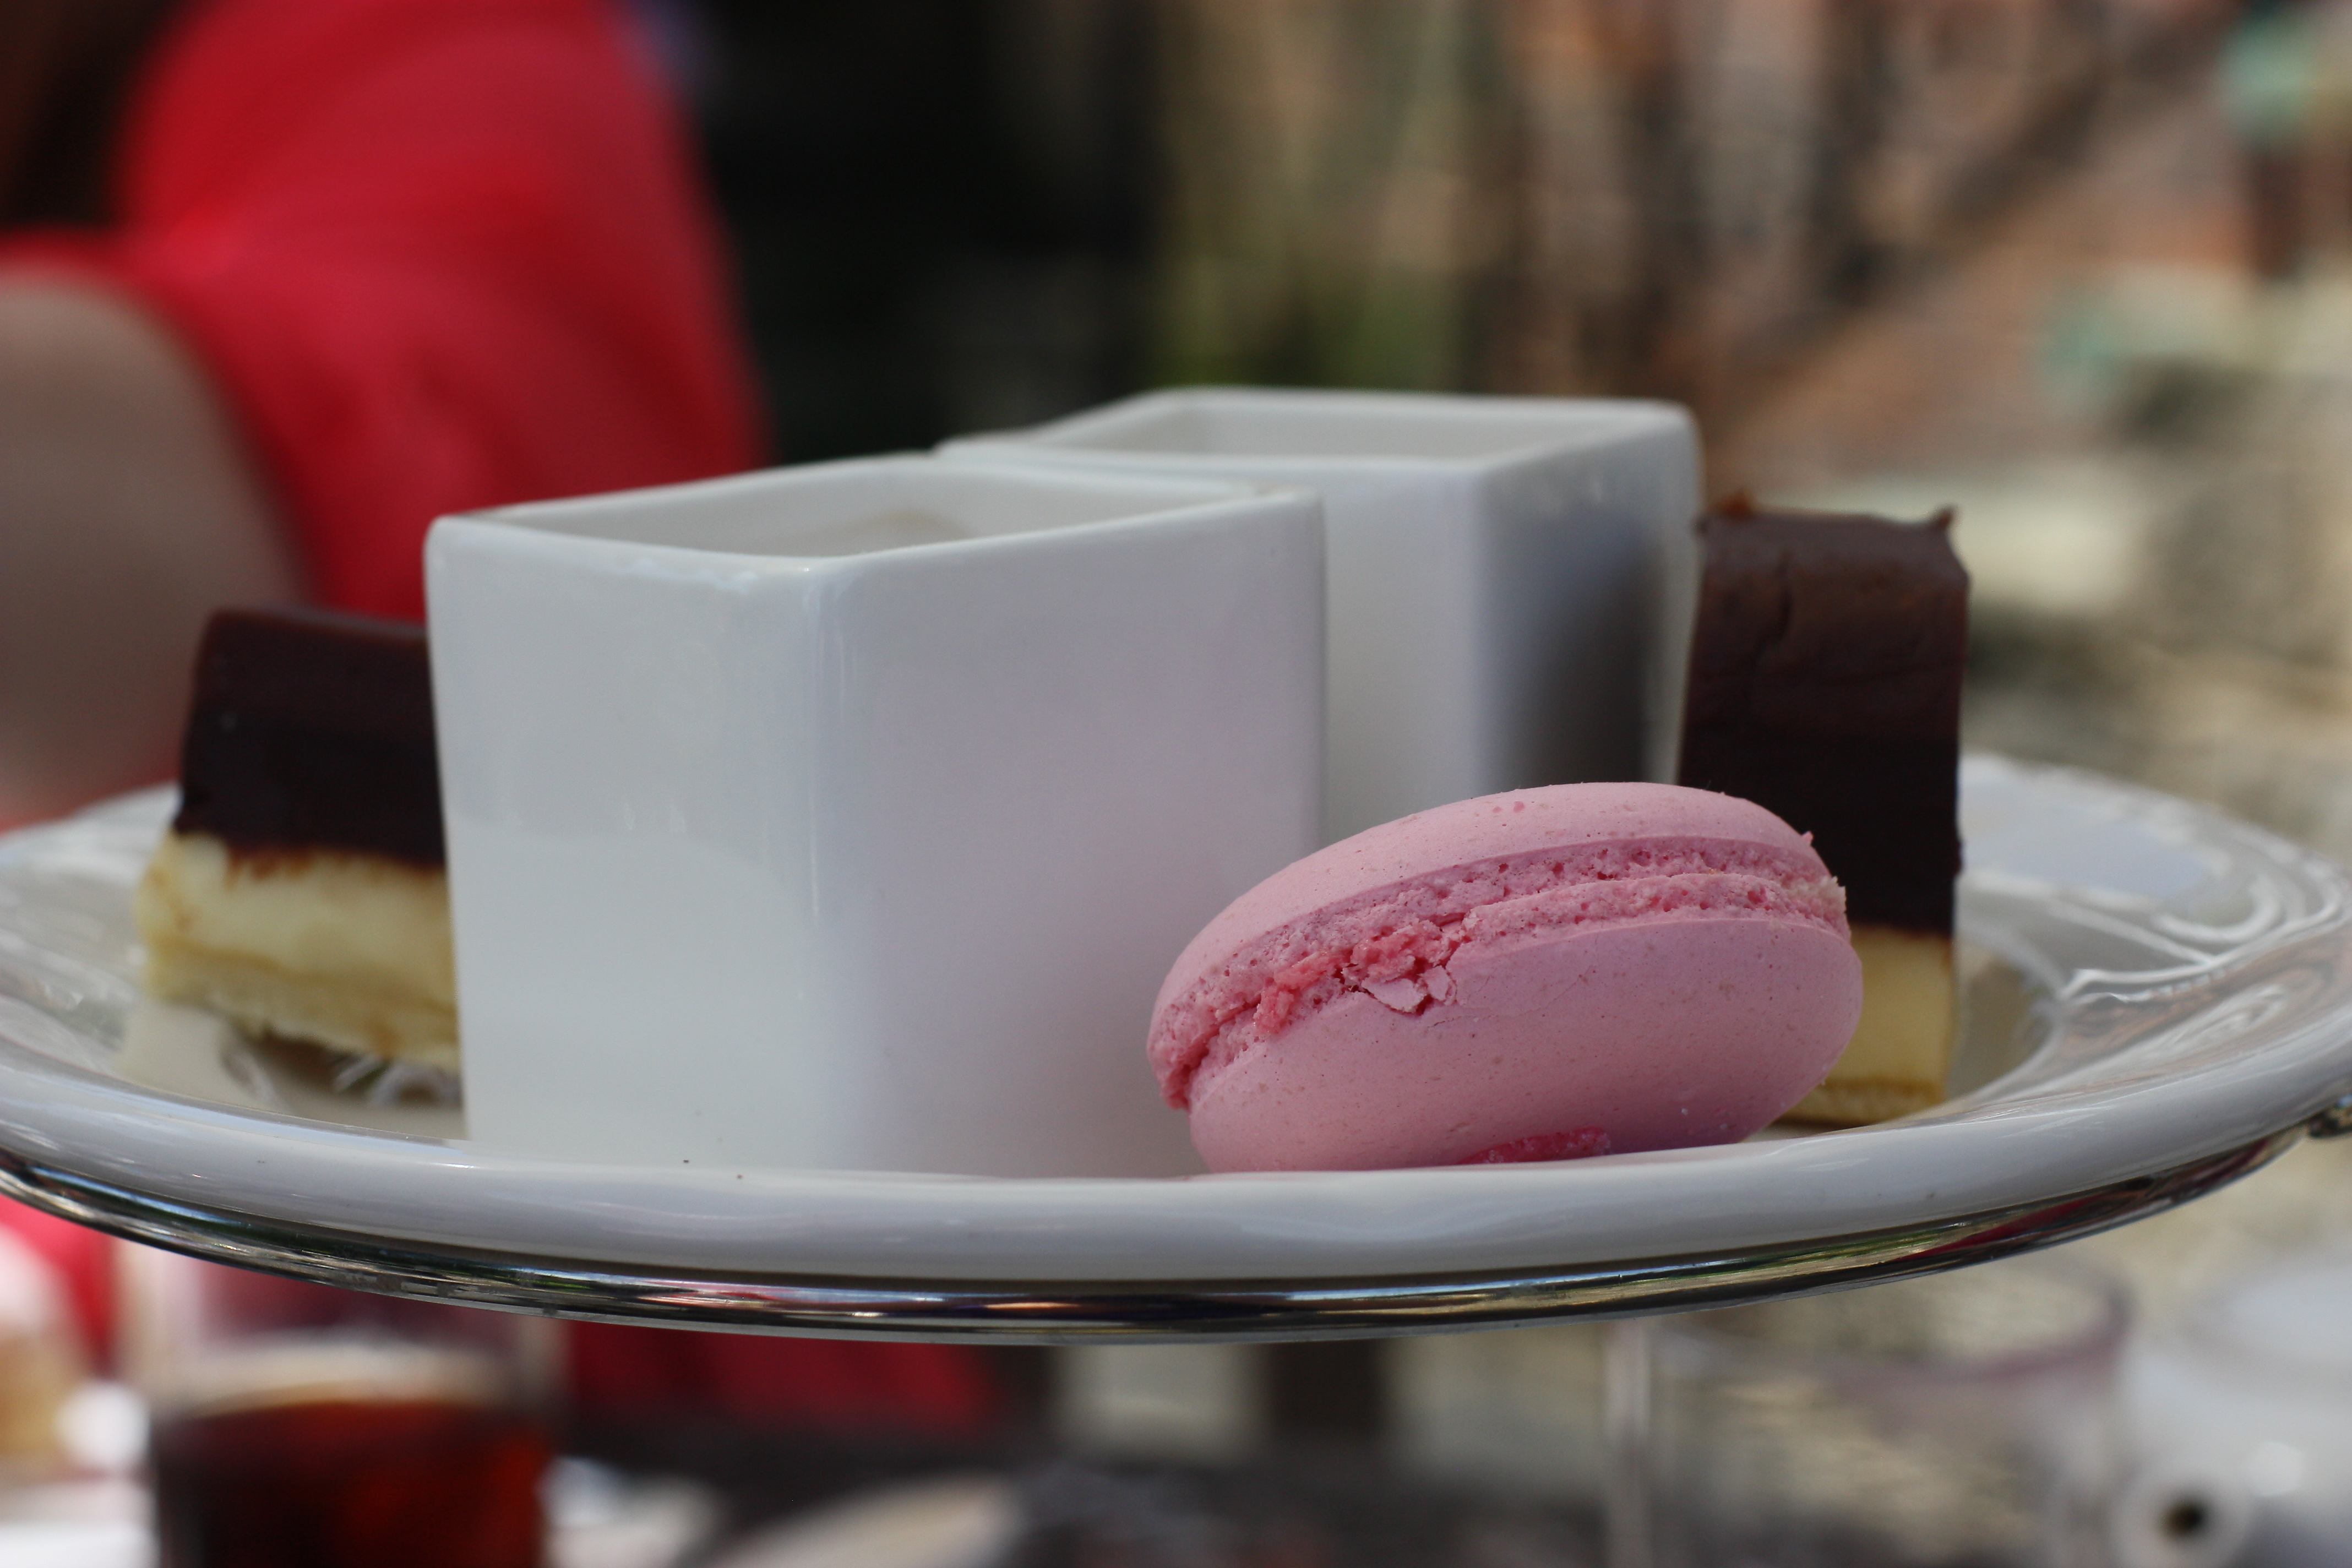 Pretty macaroon, just not for me